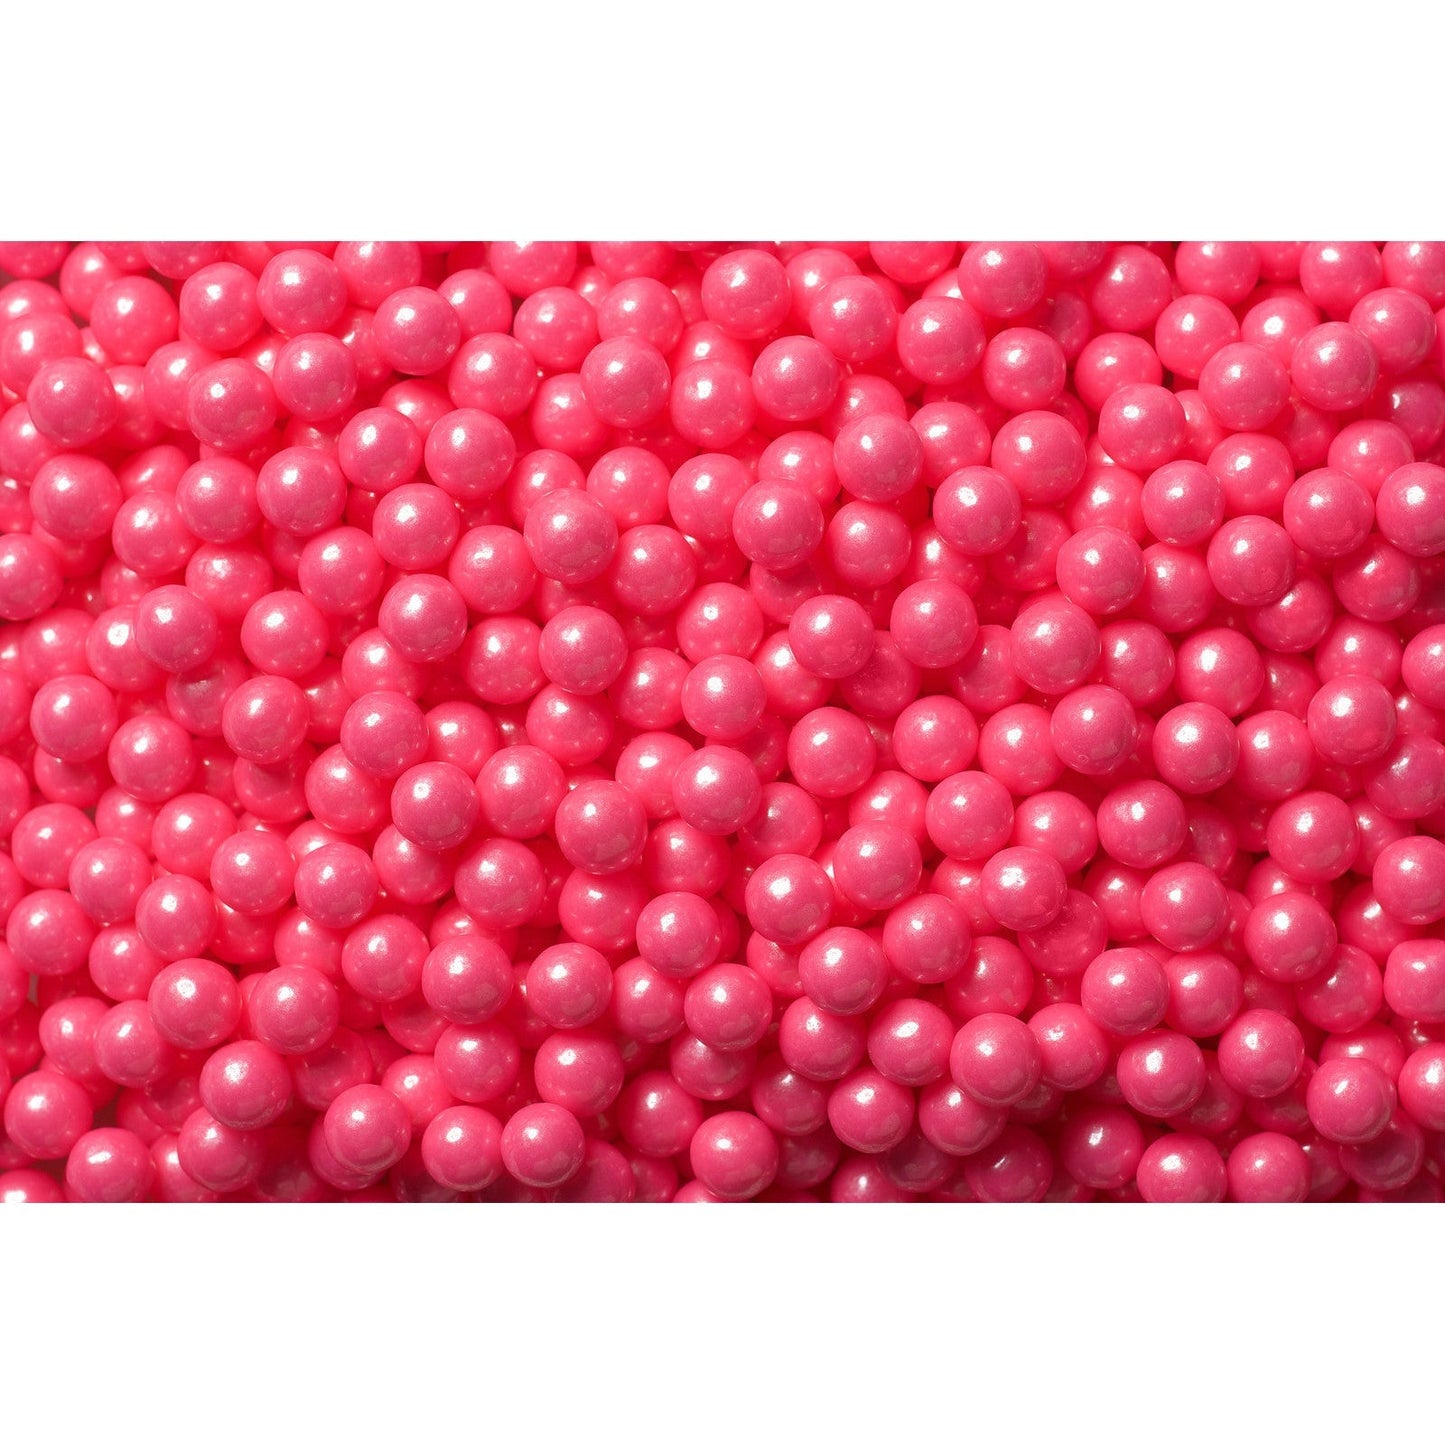 Shimmer Pearls Candies Bright Pink 2 lb. Bag